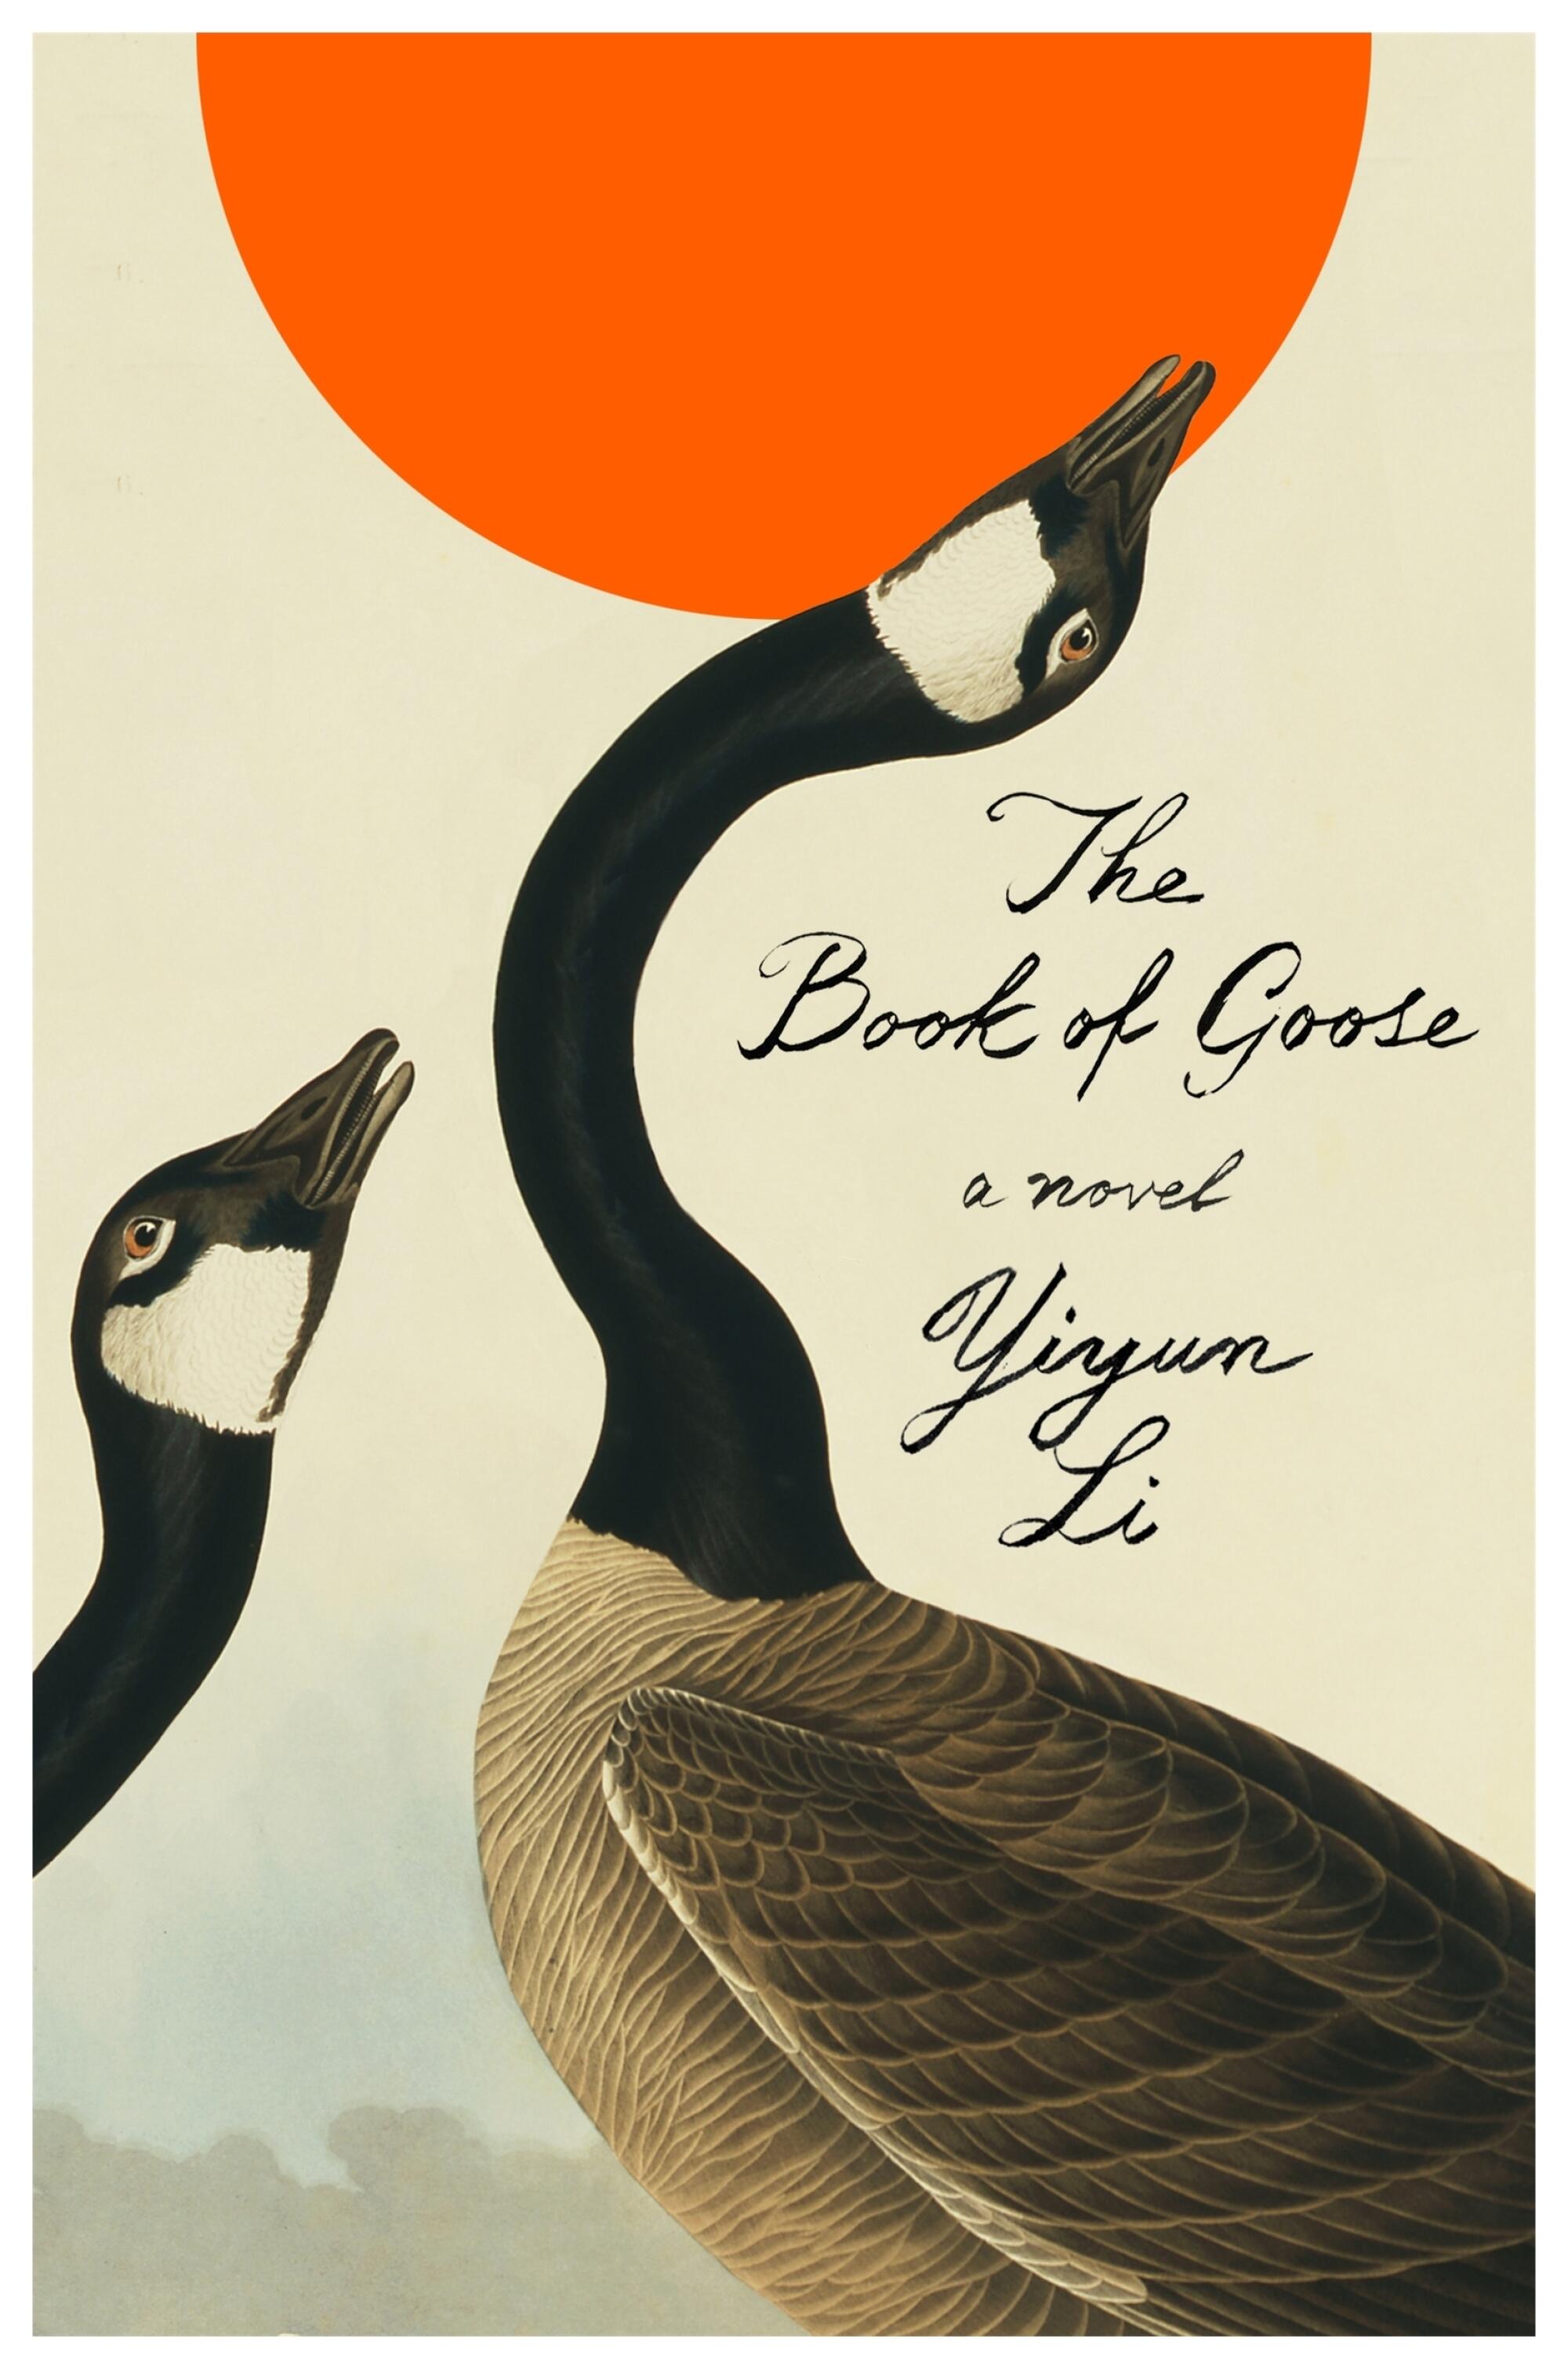 The cover of "The Book of Goose" by Yiyun Li